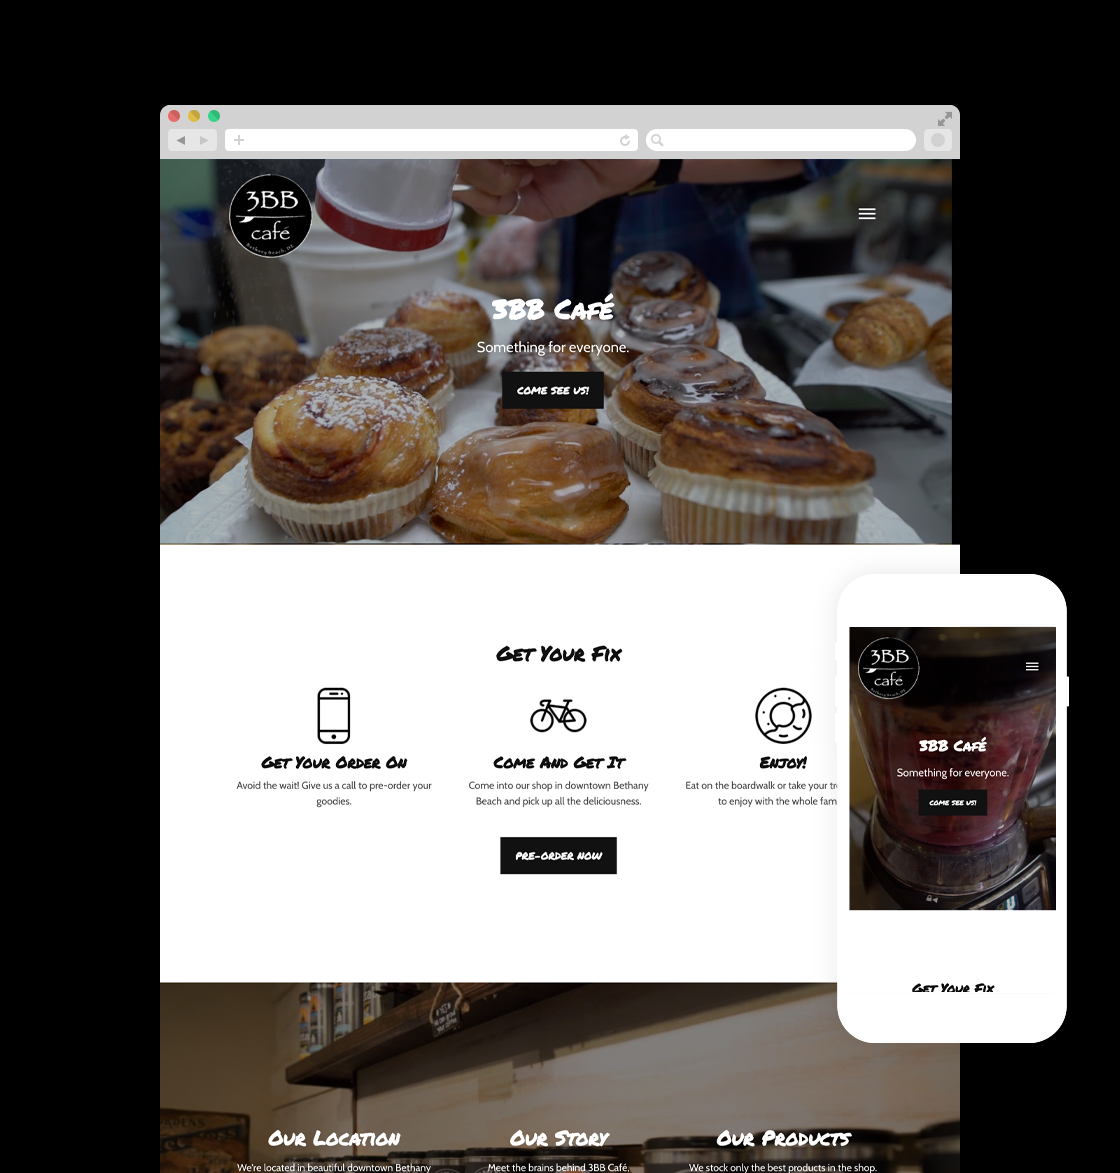 3BB Cafe website by Sara Chandlee